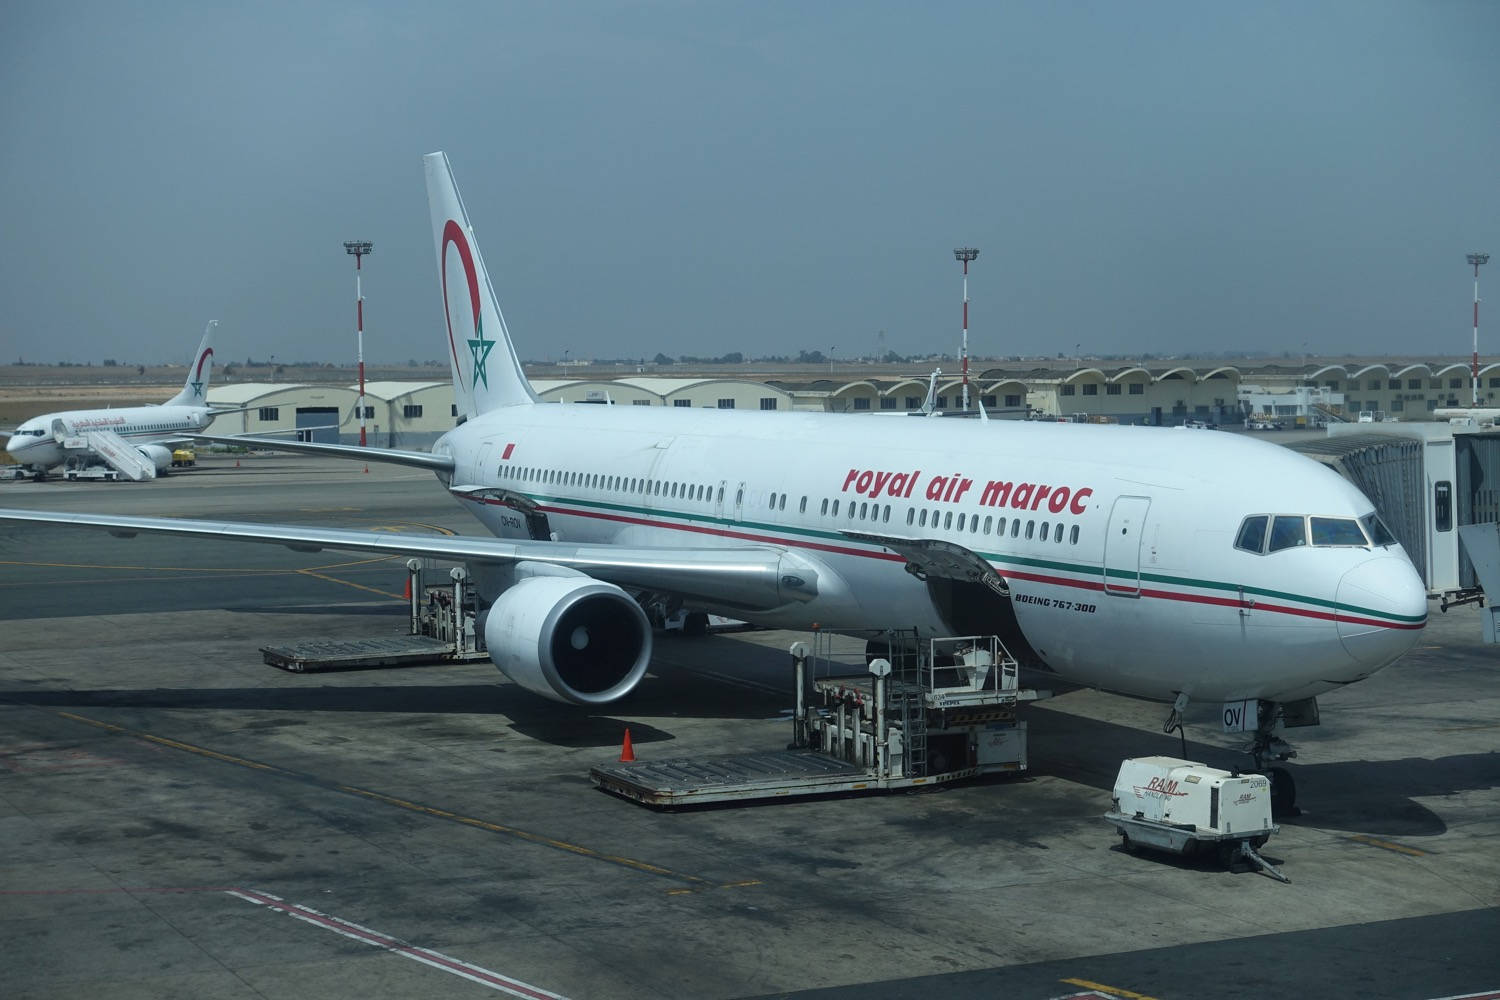 Royal Air Maroc Airplane With Cargo Vehicle Wallpaper